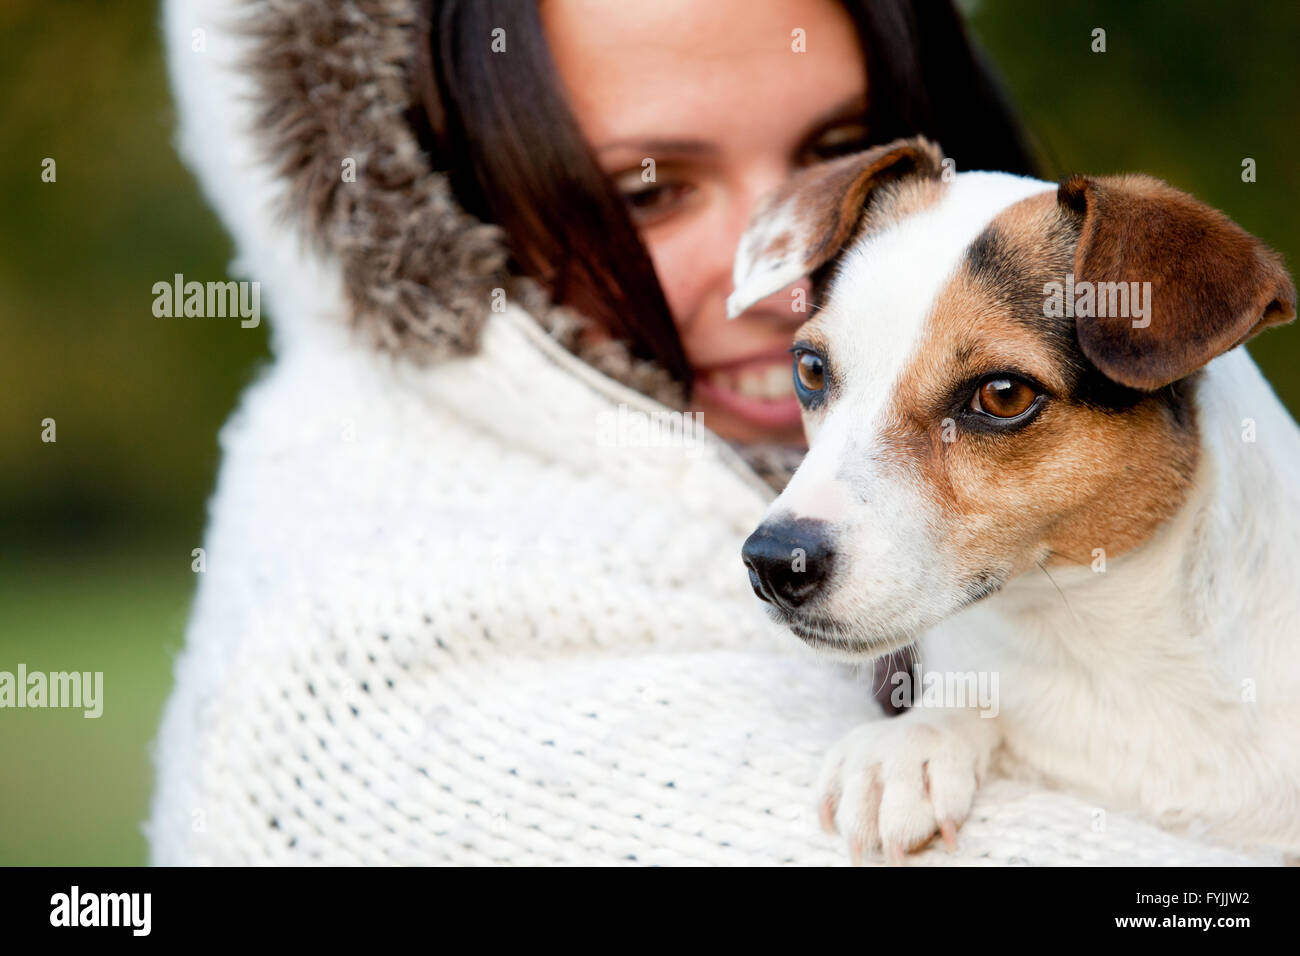 Woman and dog portrait Stock Photo